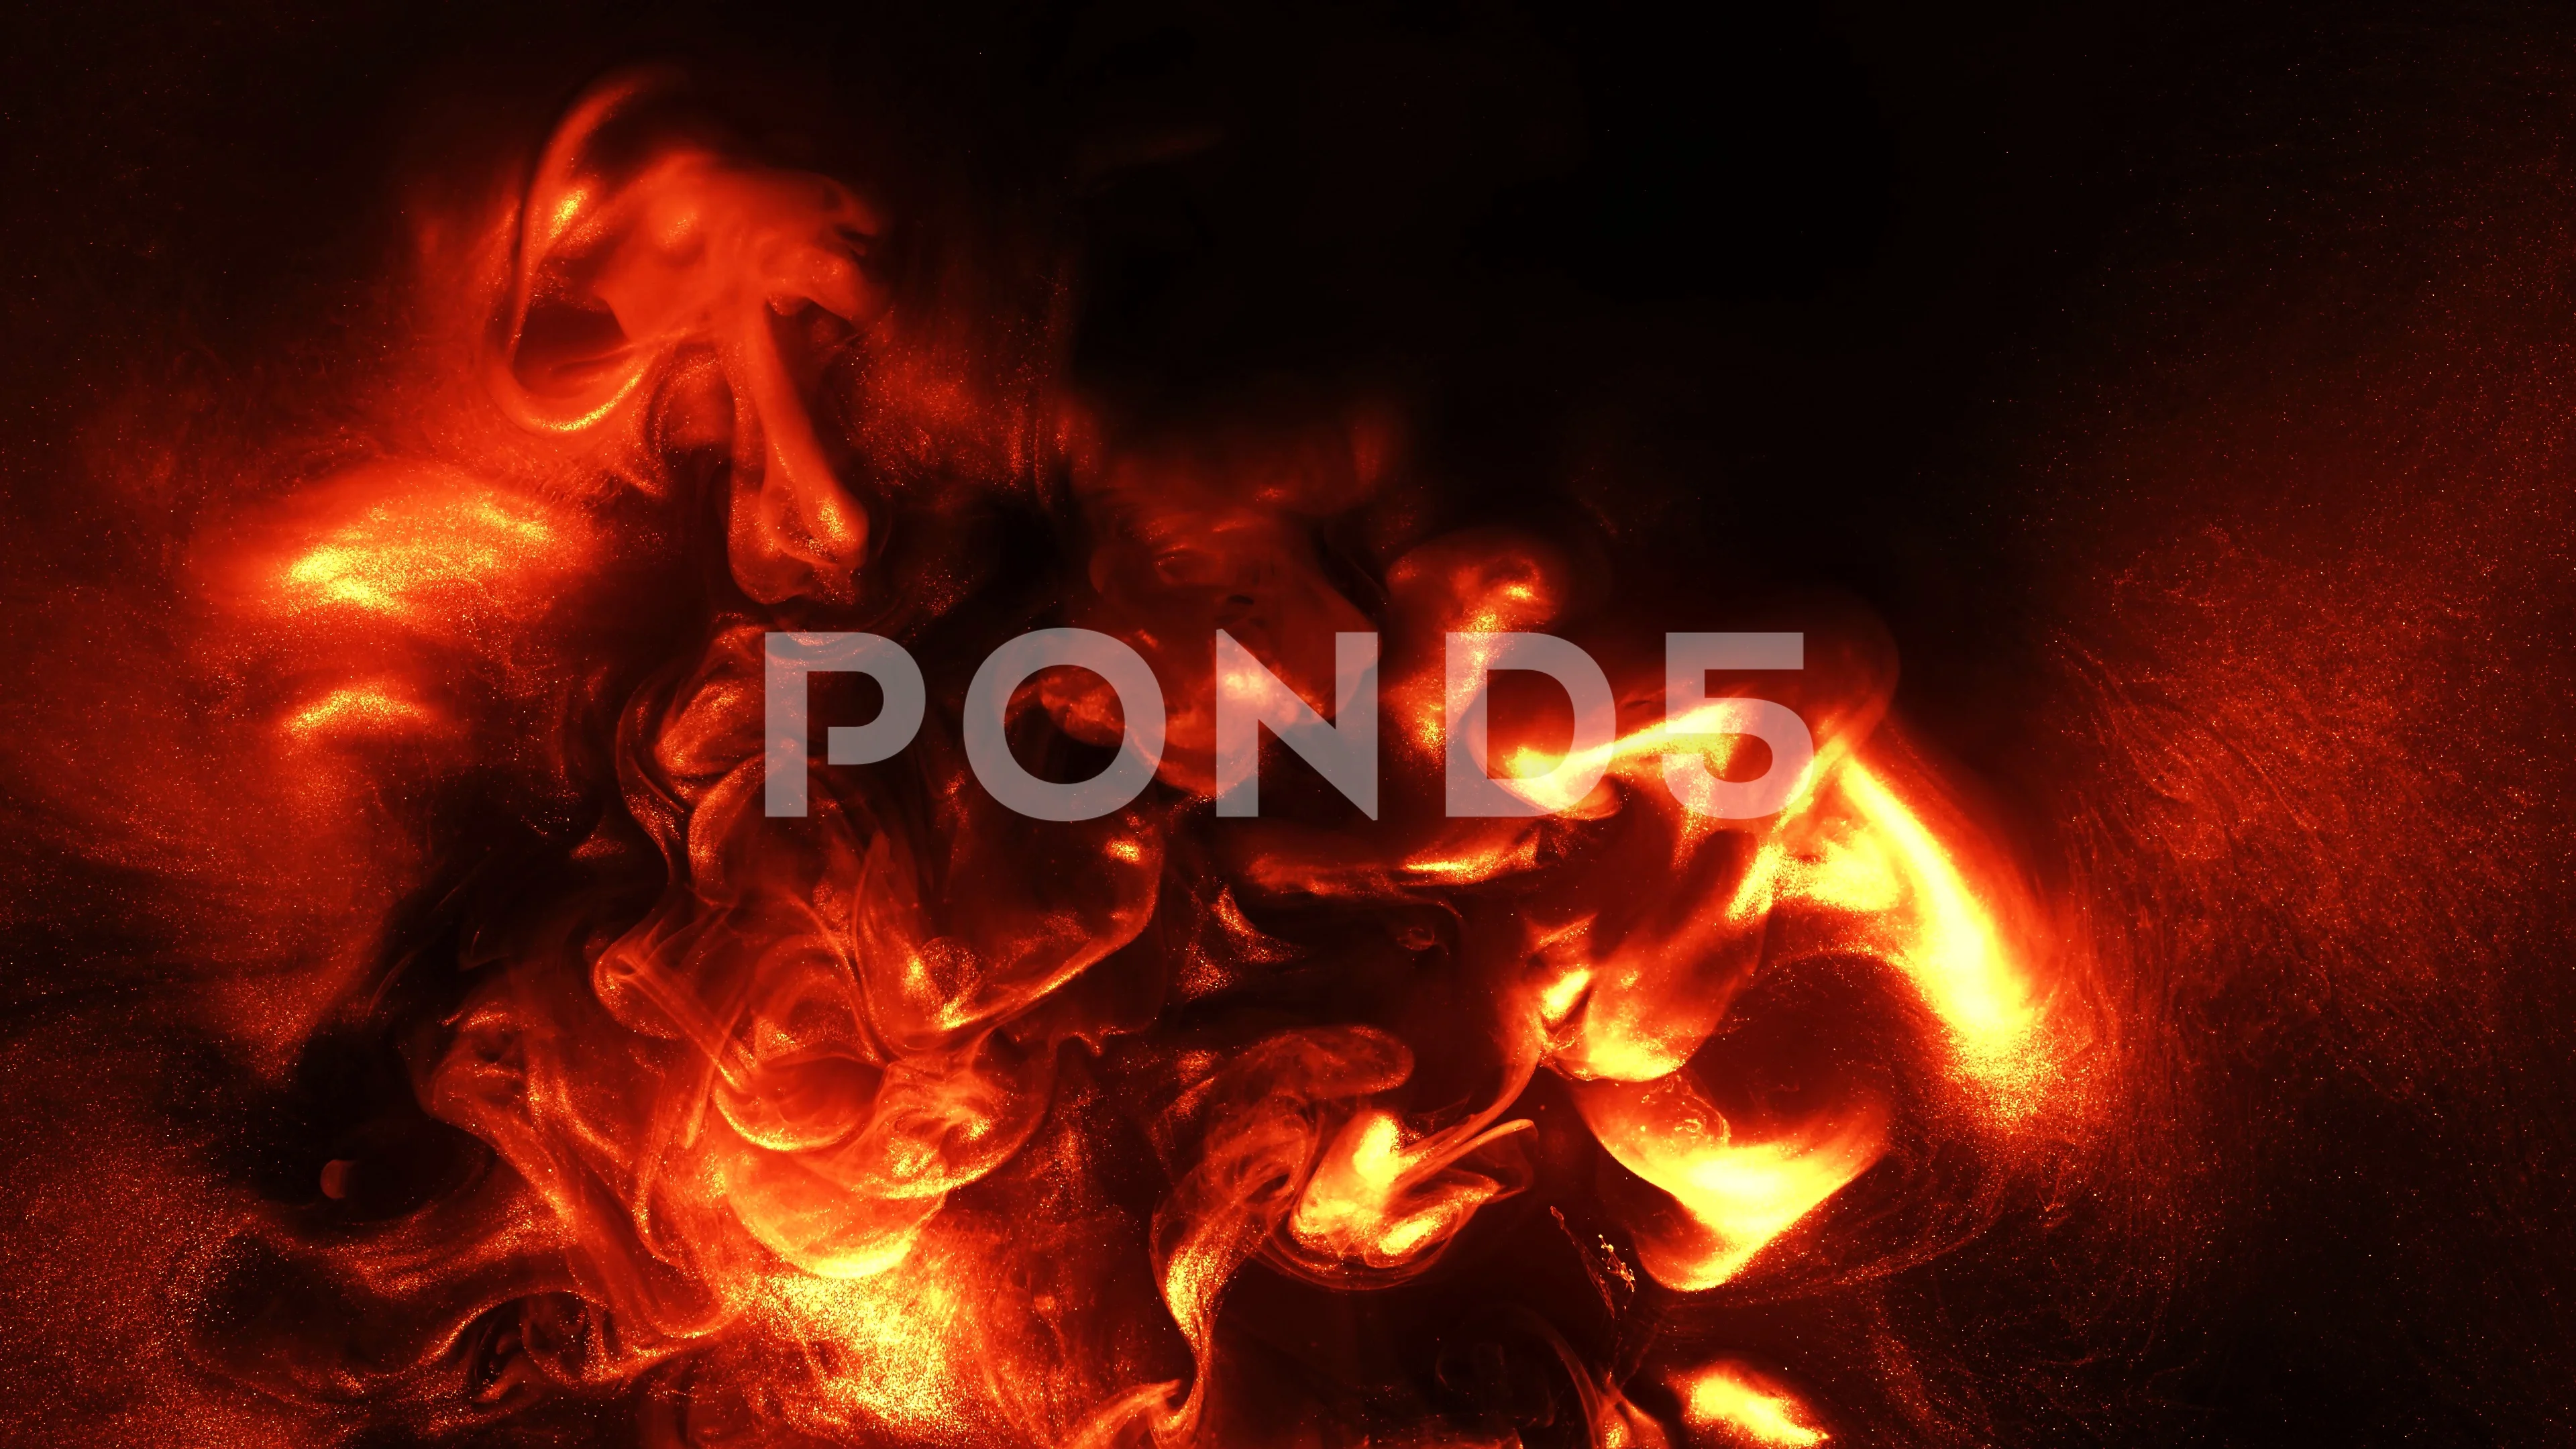 Animated Red And Yellow Liquid Fire Transparent, Animated Fire